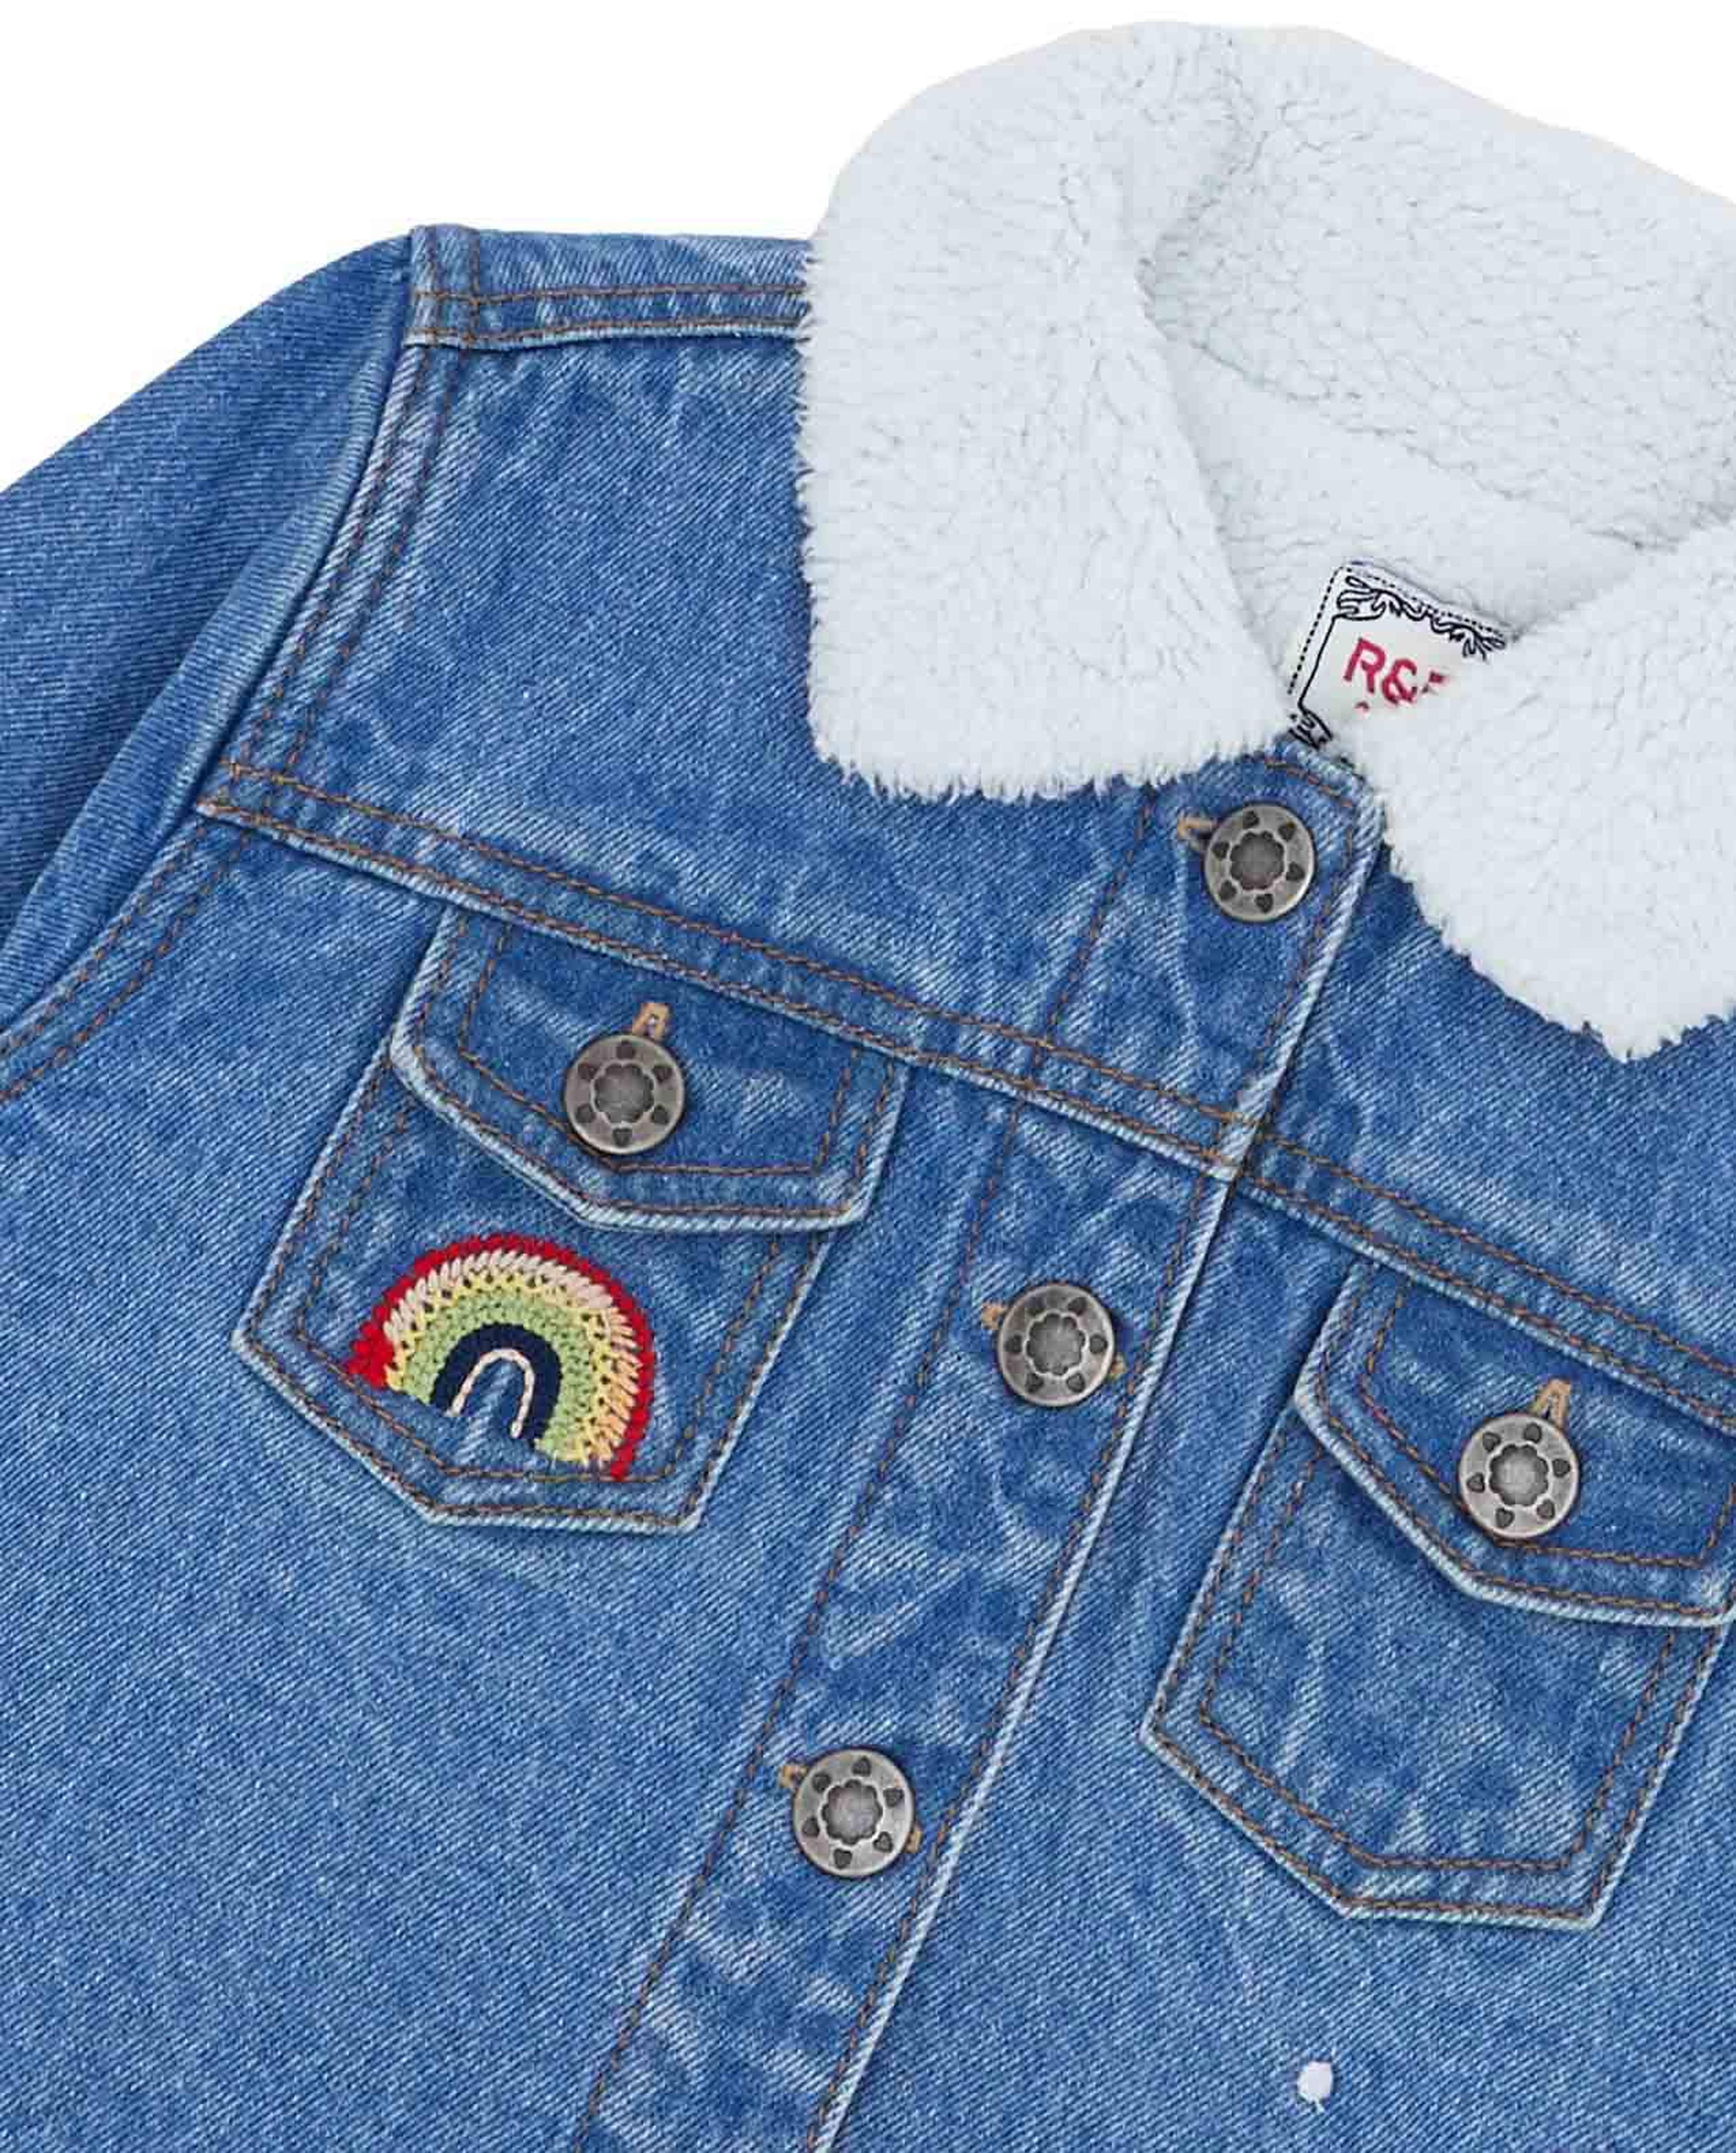 Embroidered Denim Jacket with Long Sleeves